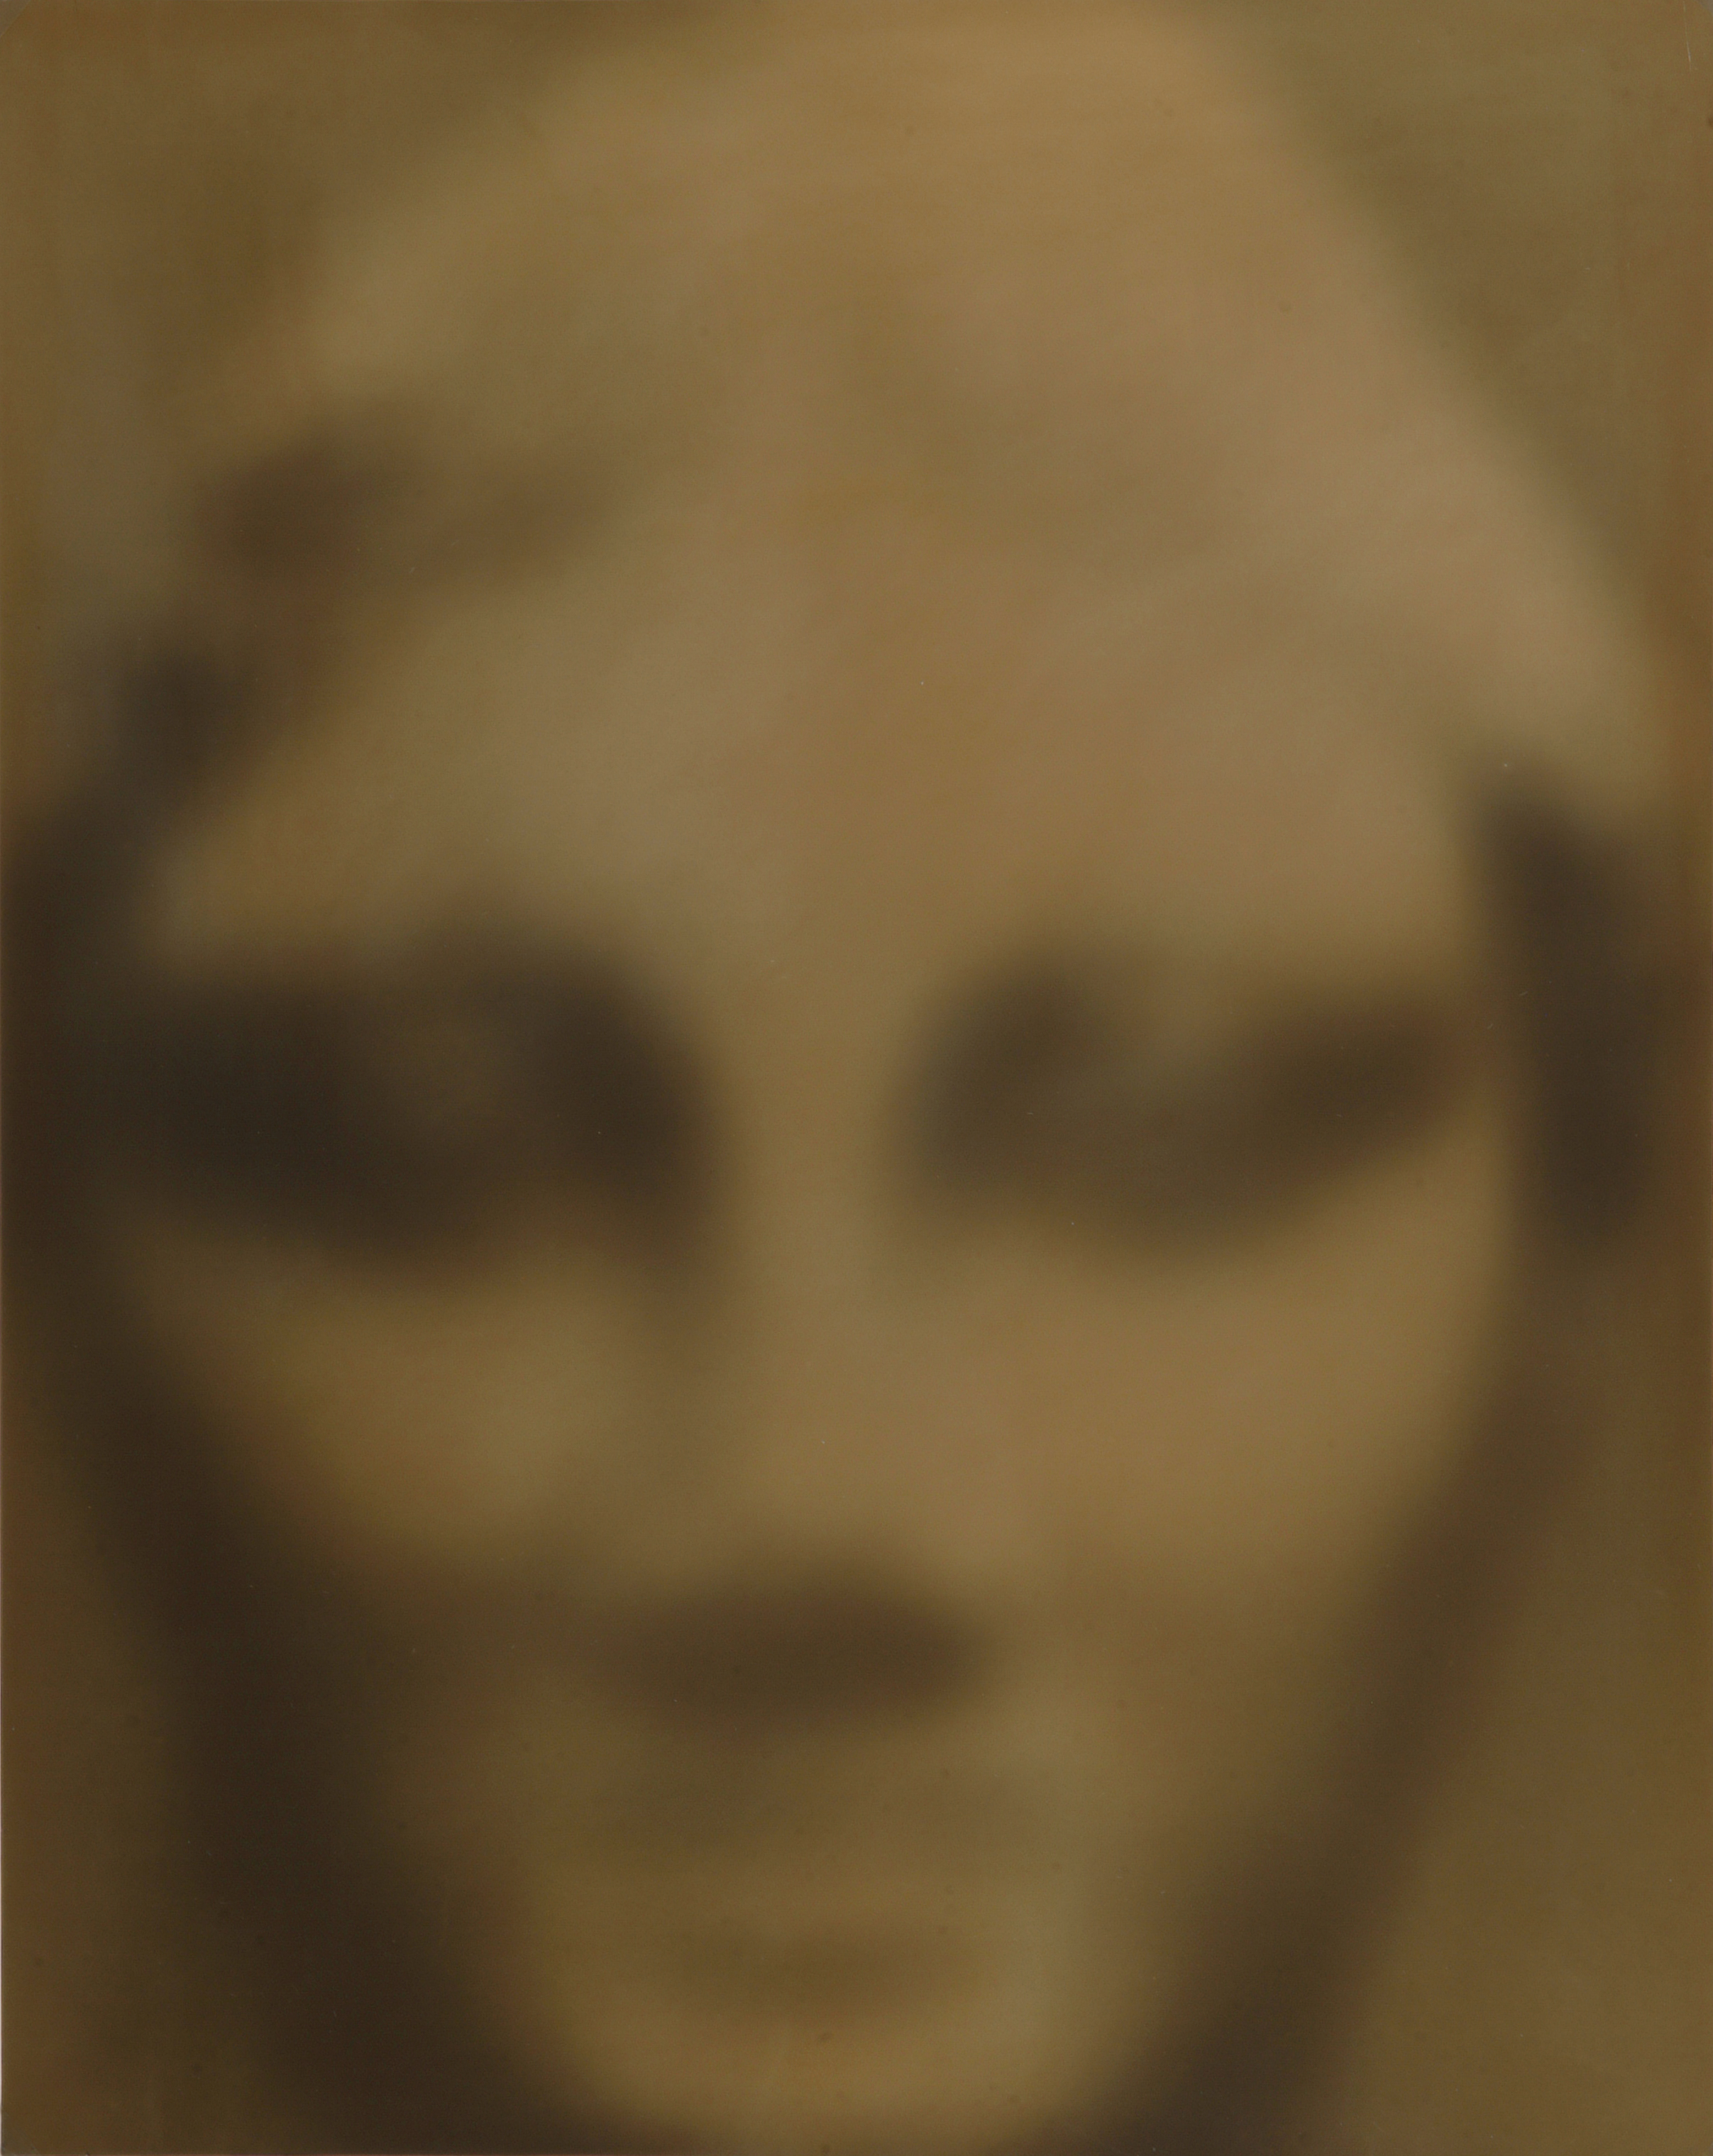 Face #2, Statue, from Series 6